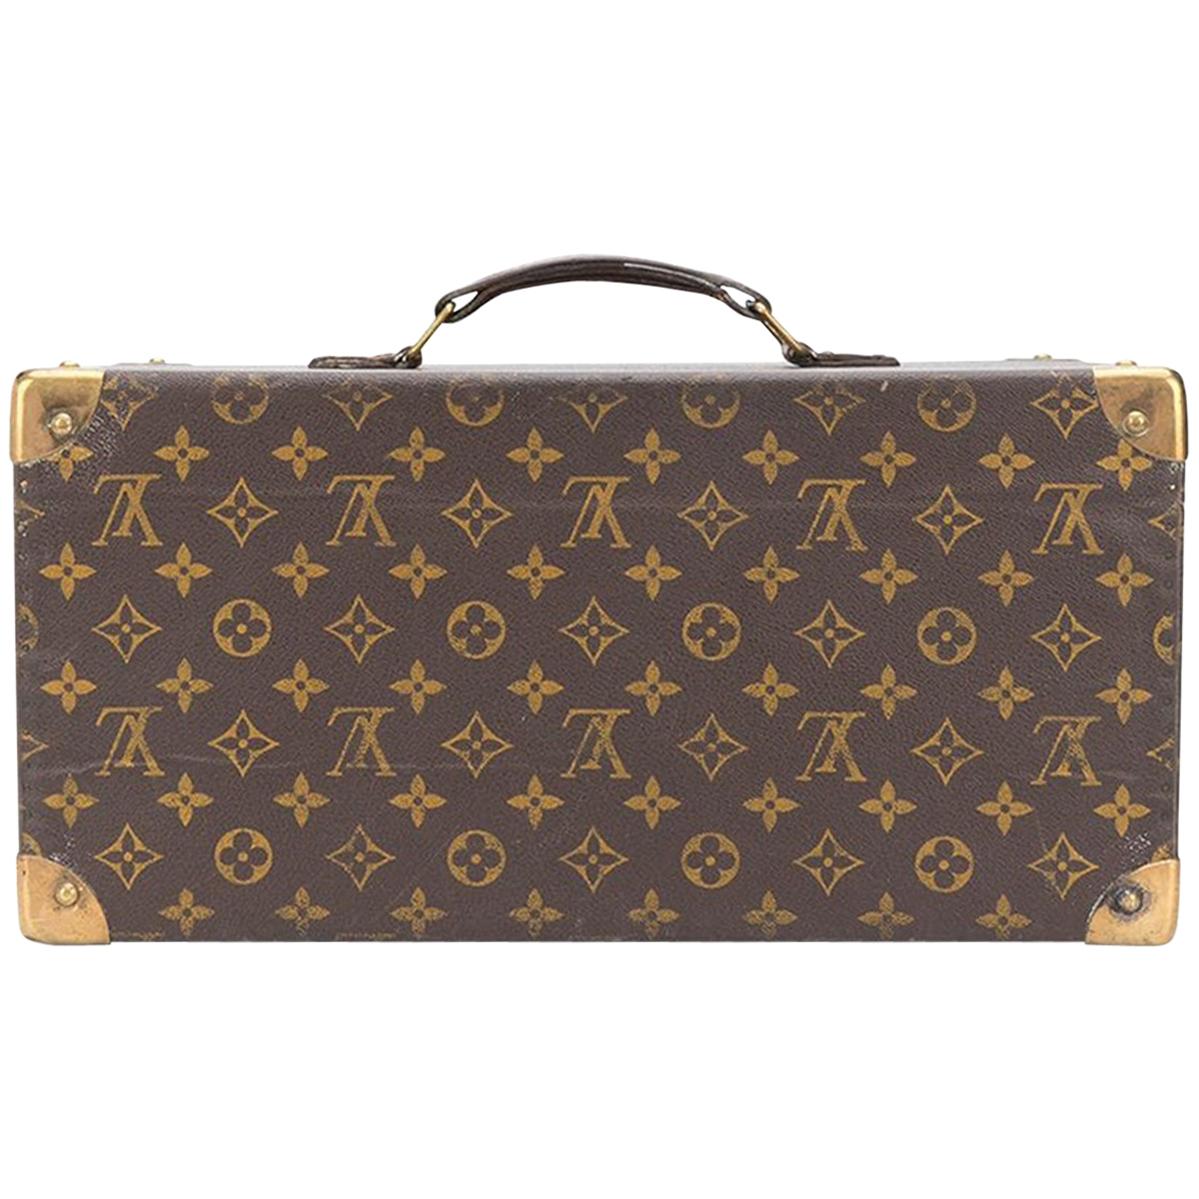 Louis Vuitton Cosmetic Trunk - 2 For Sale on 1stDibs  pink louis vuitton  beauty trunk, louis vuitton beauty case trunk, louis vuitton makeup trunk  price